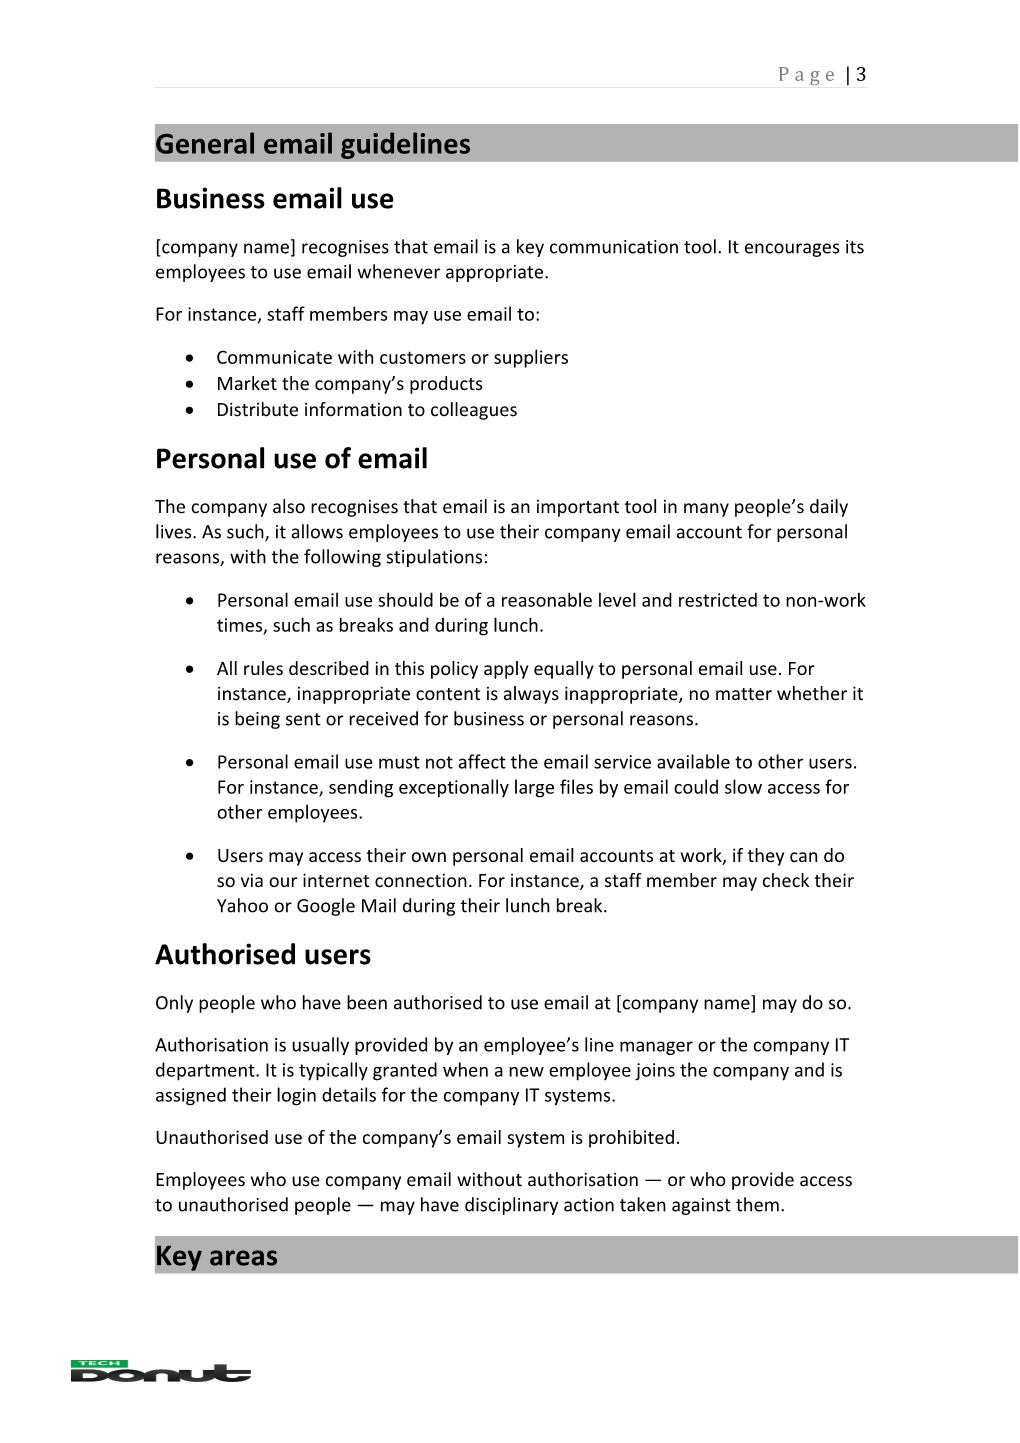 Sample Emailuse Policy